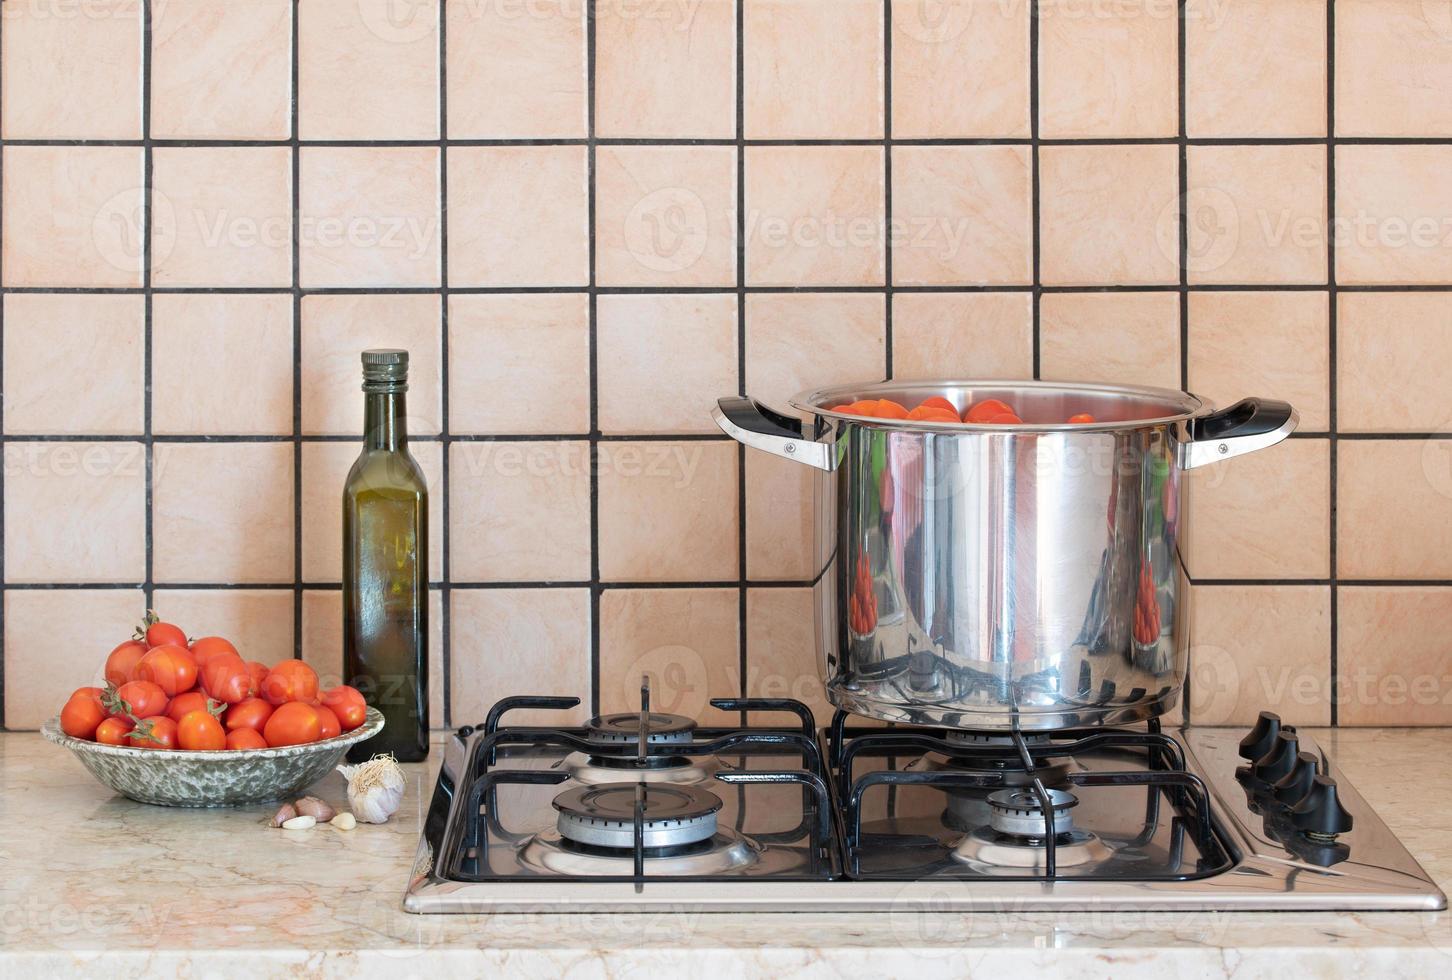 A stainless steel pot with tomatoes in it sits on an old gas stove. Next to the pot is a bowl of tomatoes, a bottle of olive oil and some garlic. The background is tiled. photo